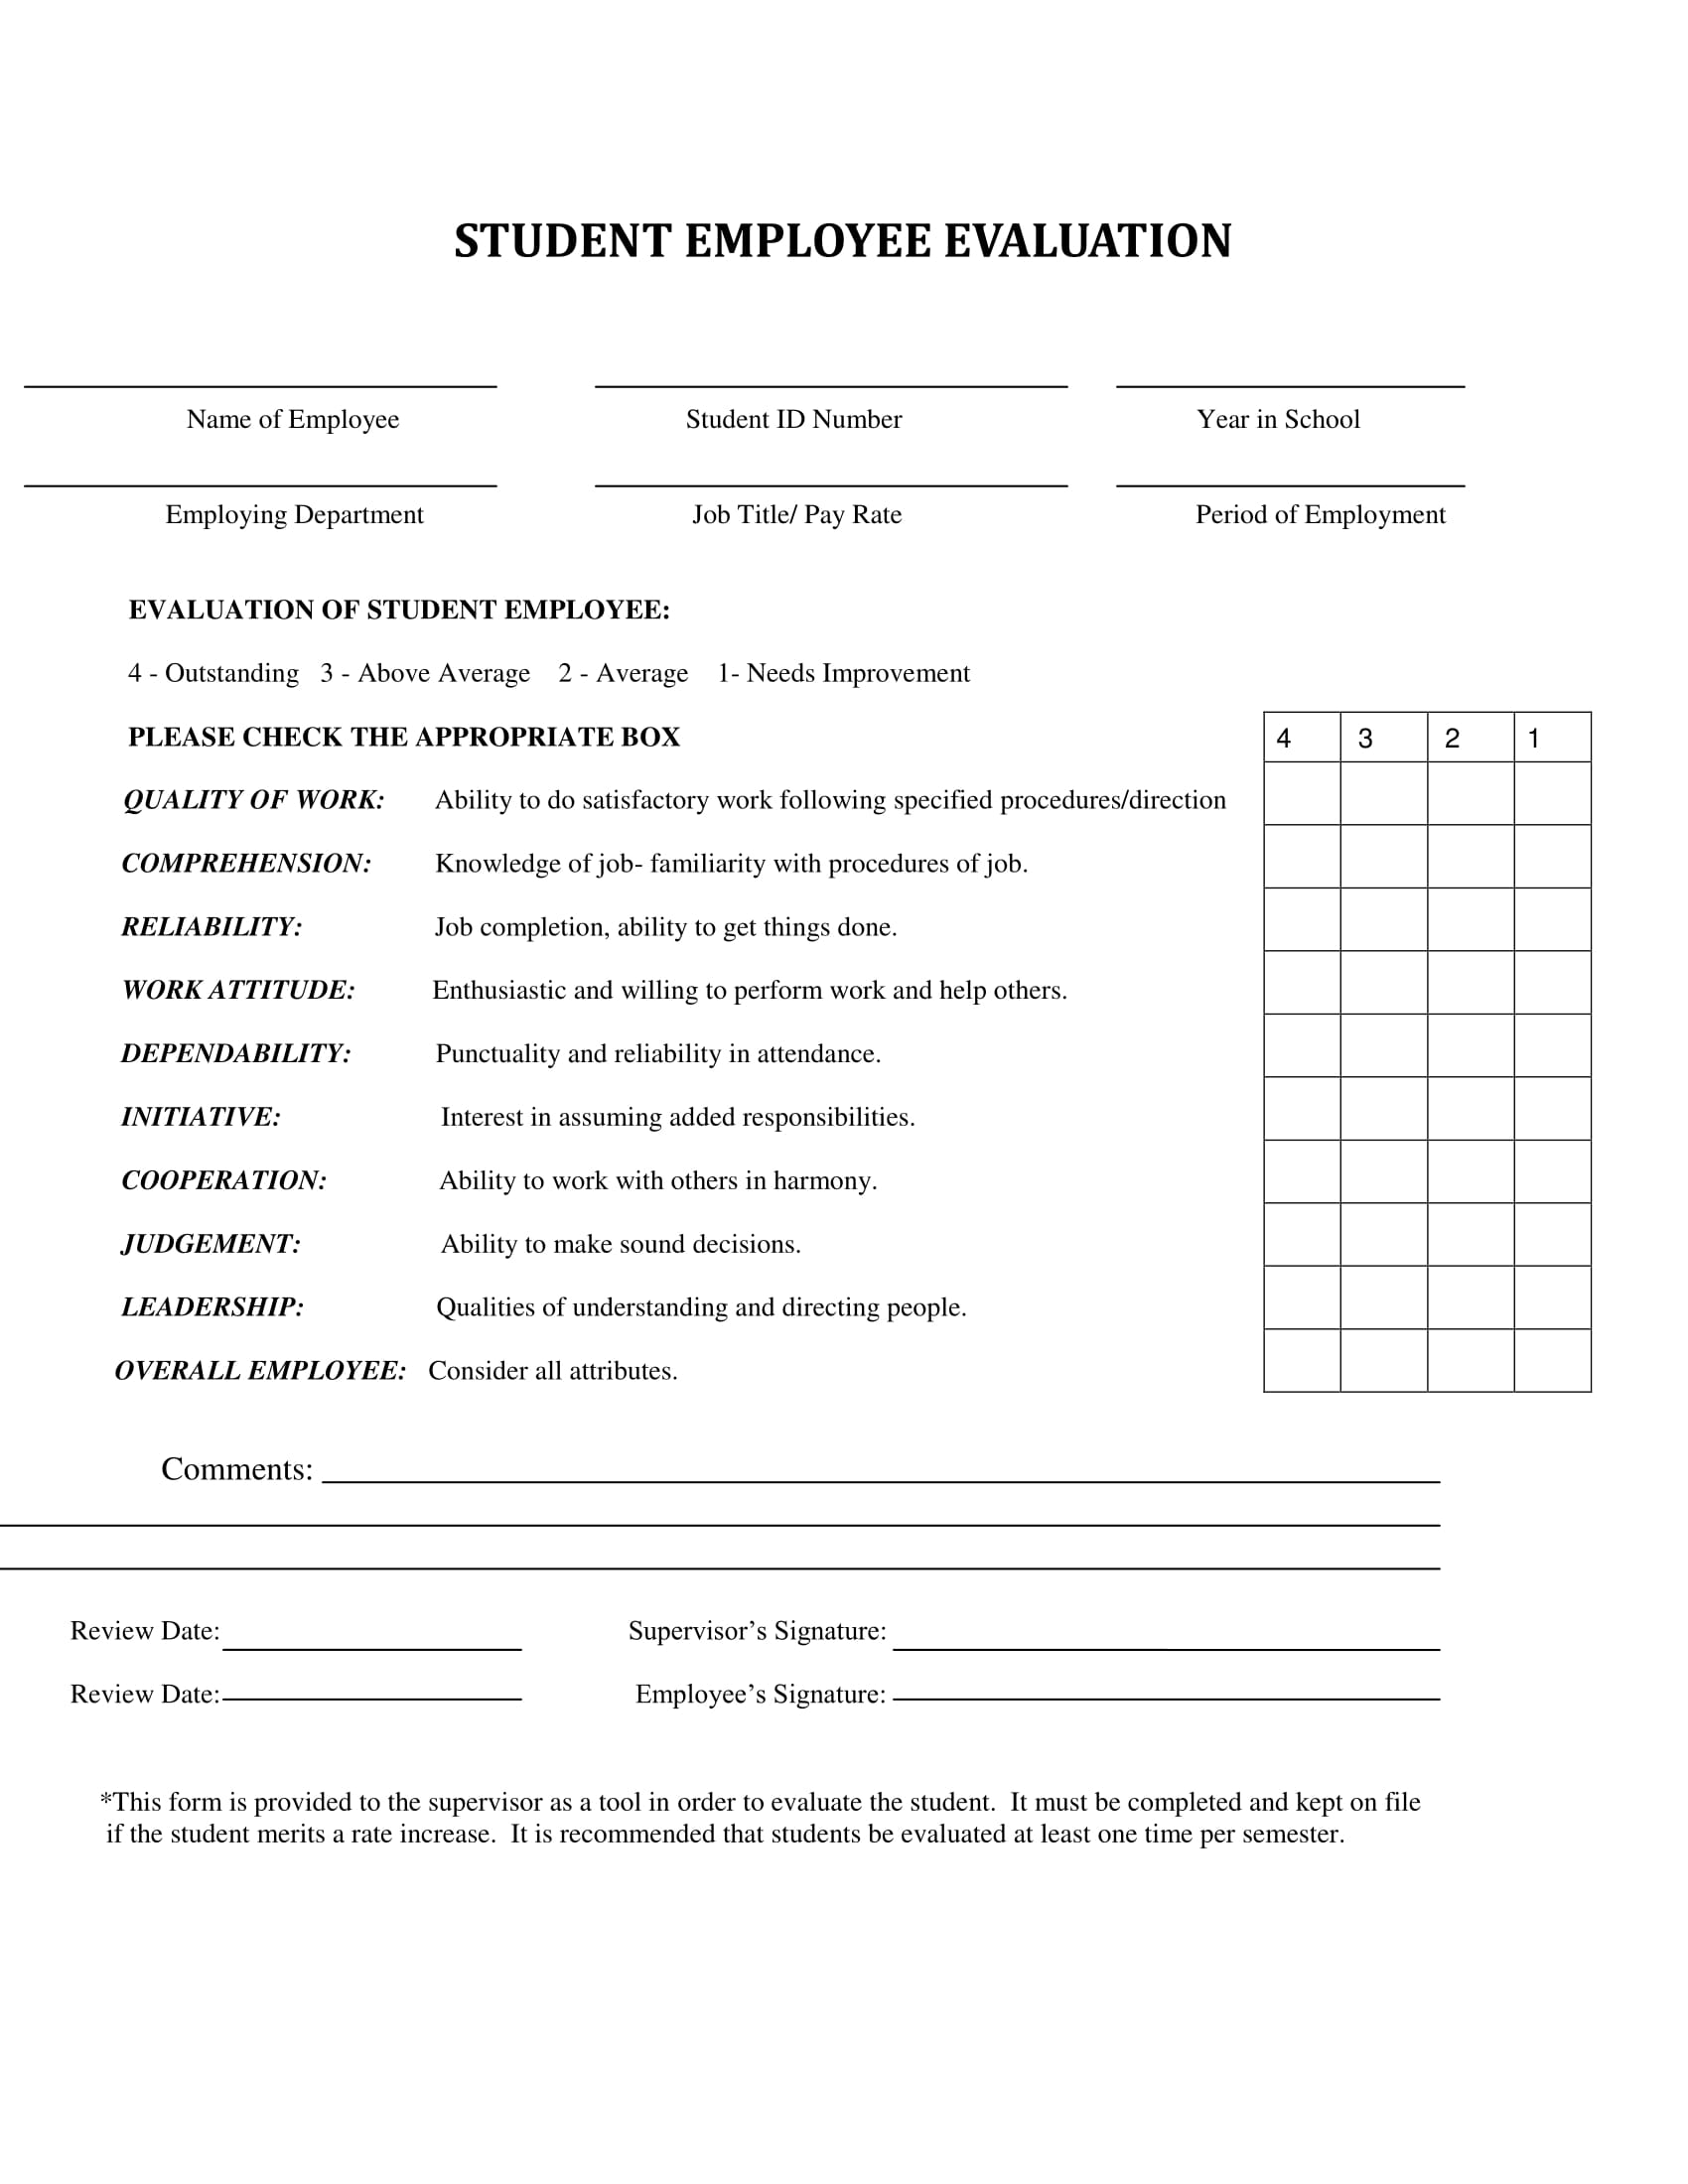 student employee evaluation form 1